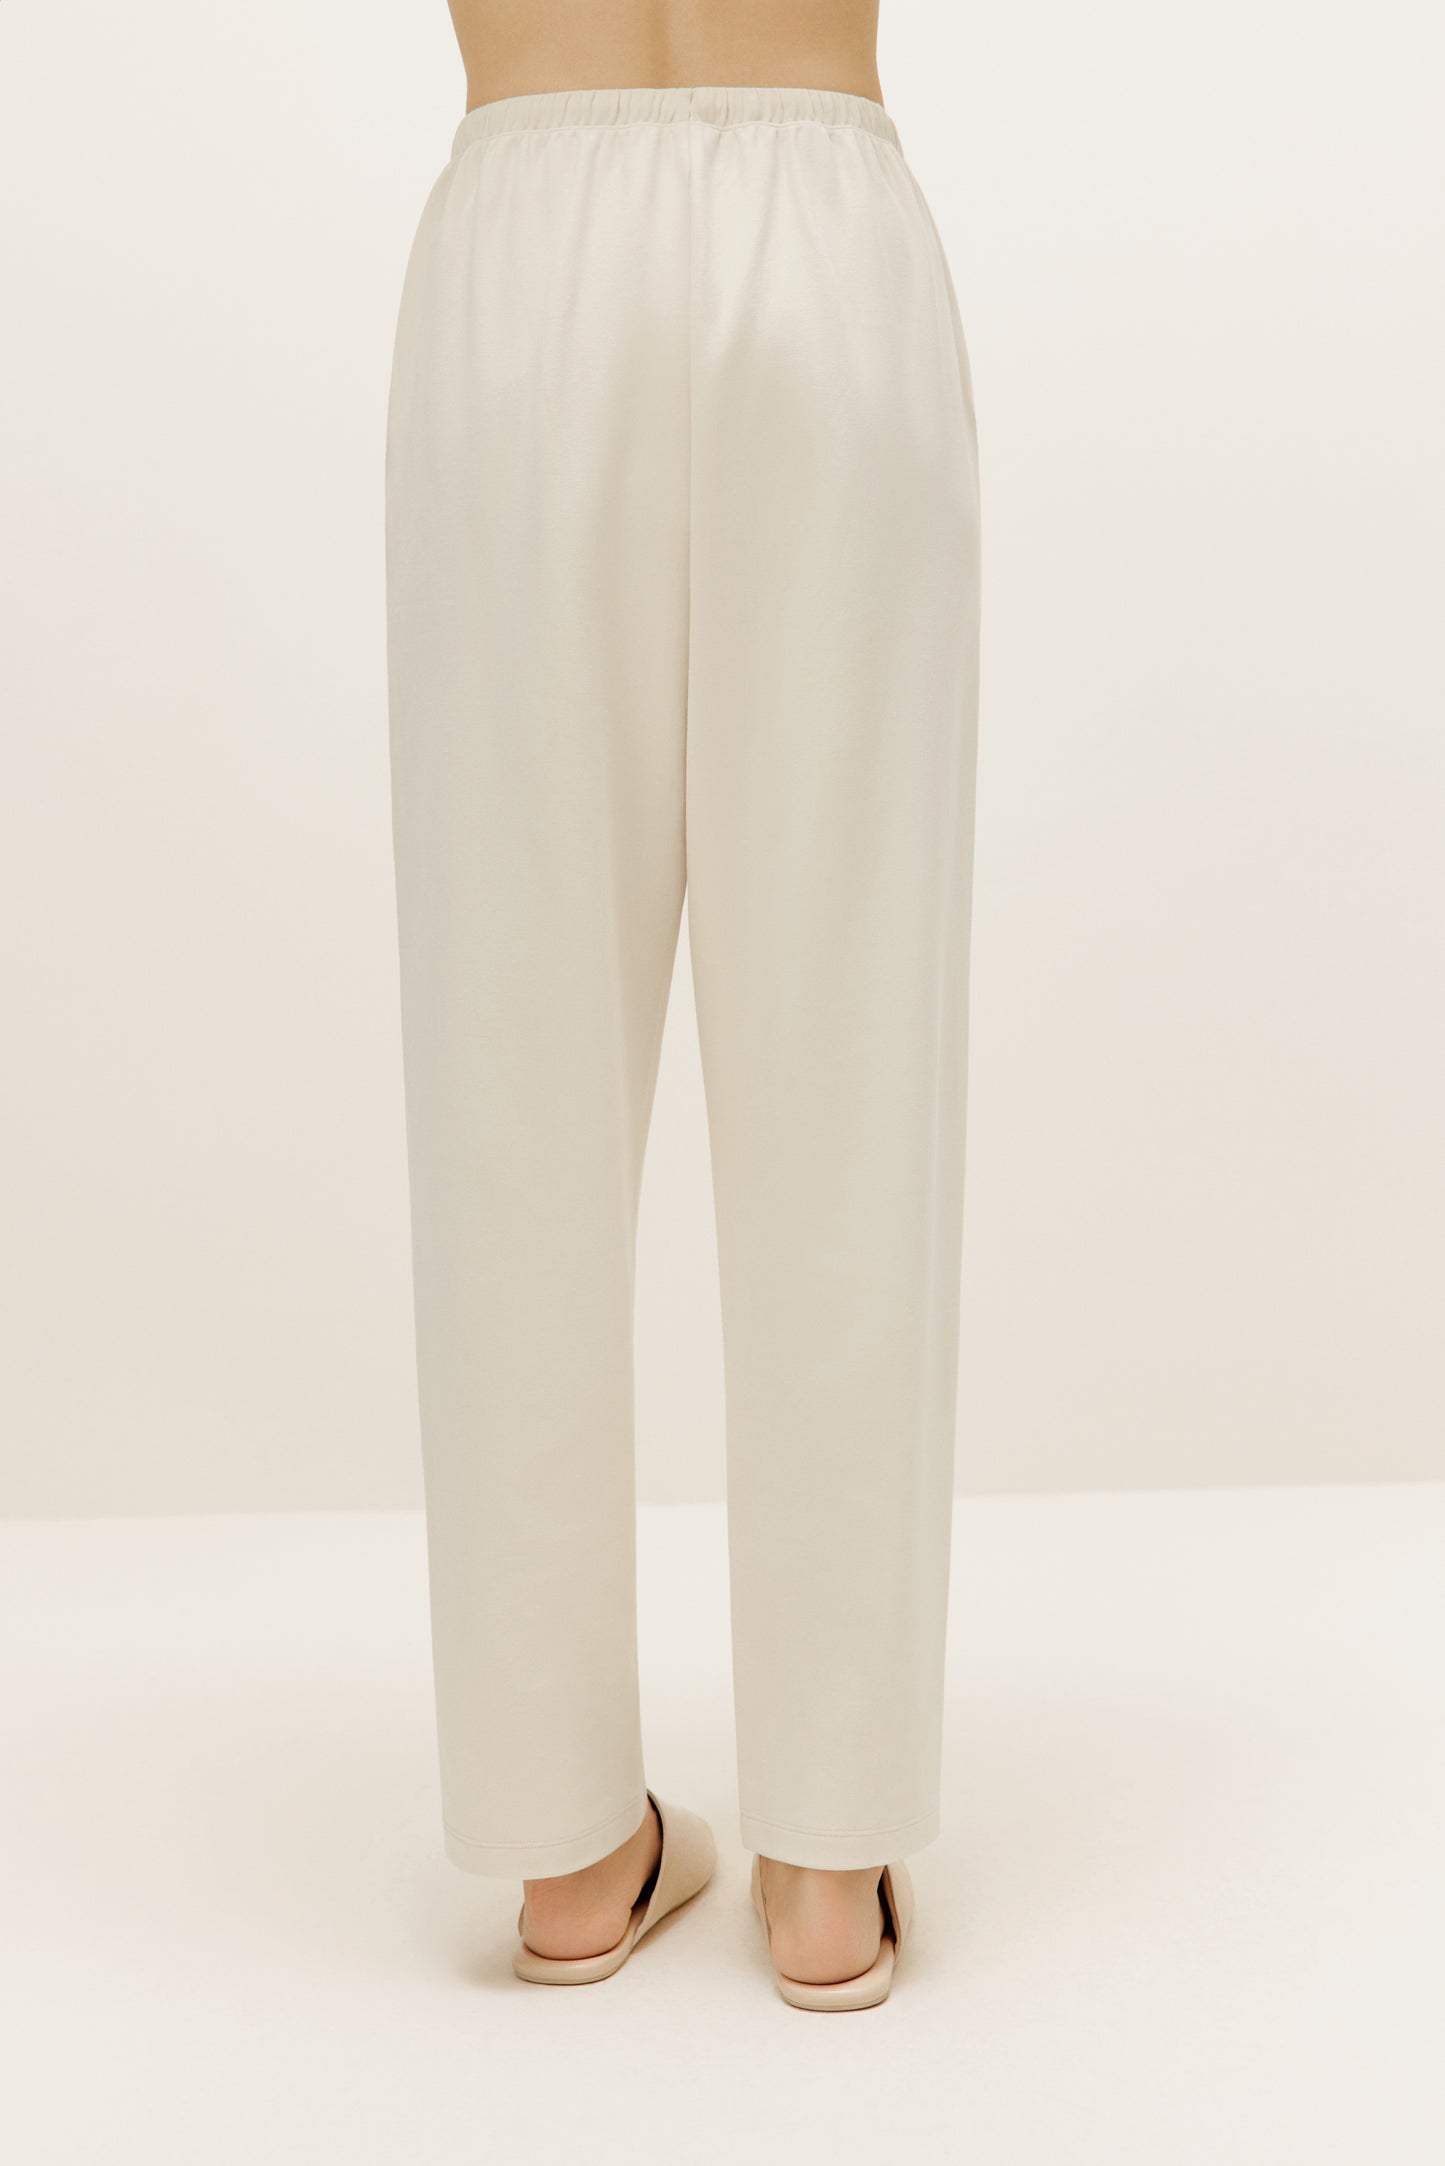 a pair of cream color pants  from back